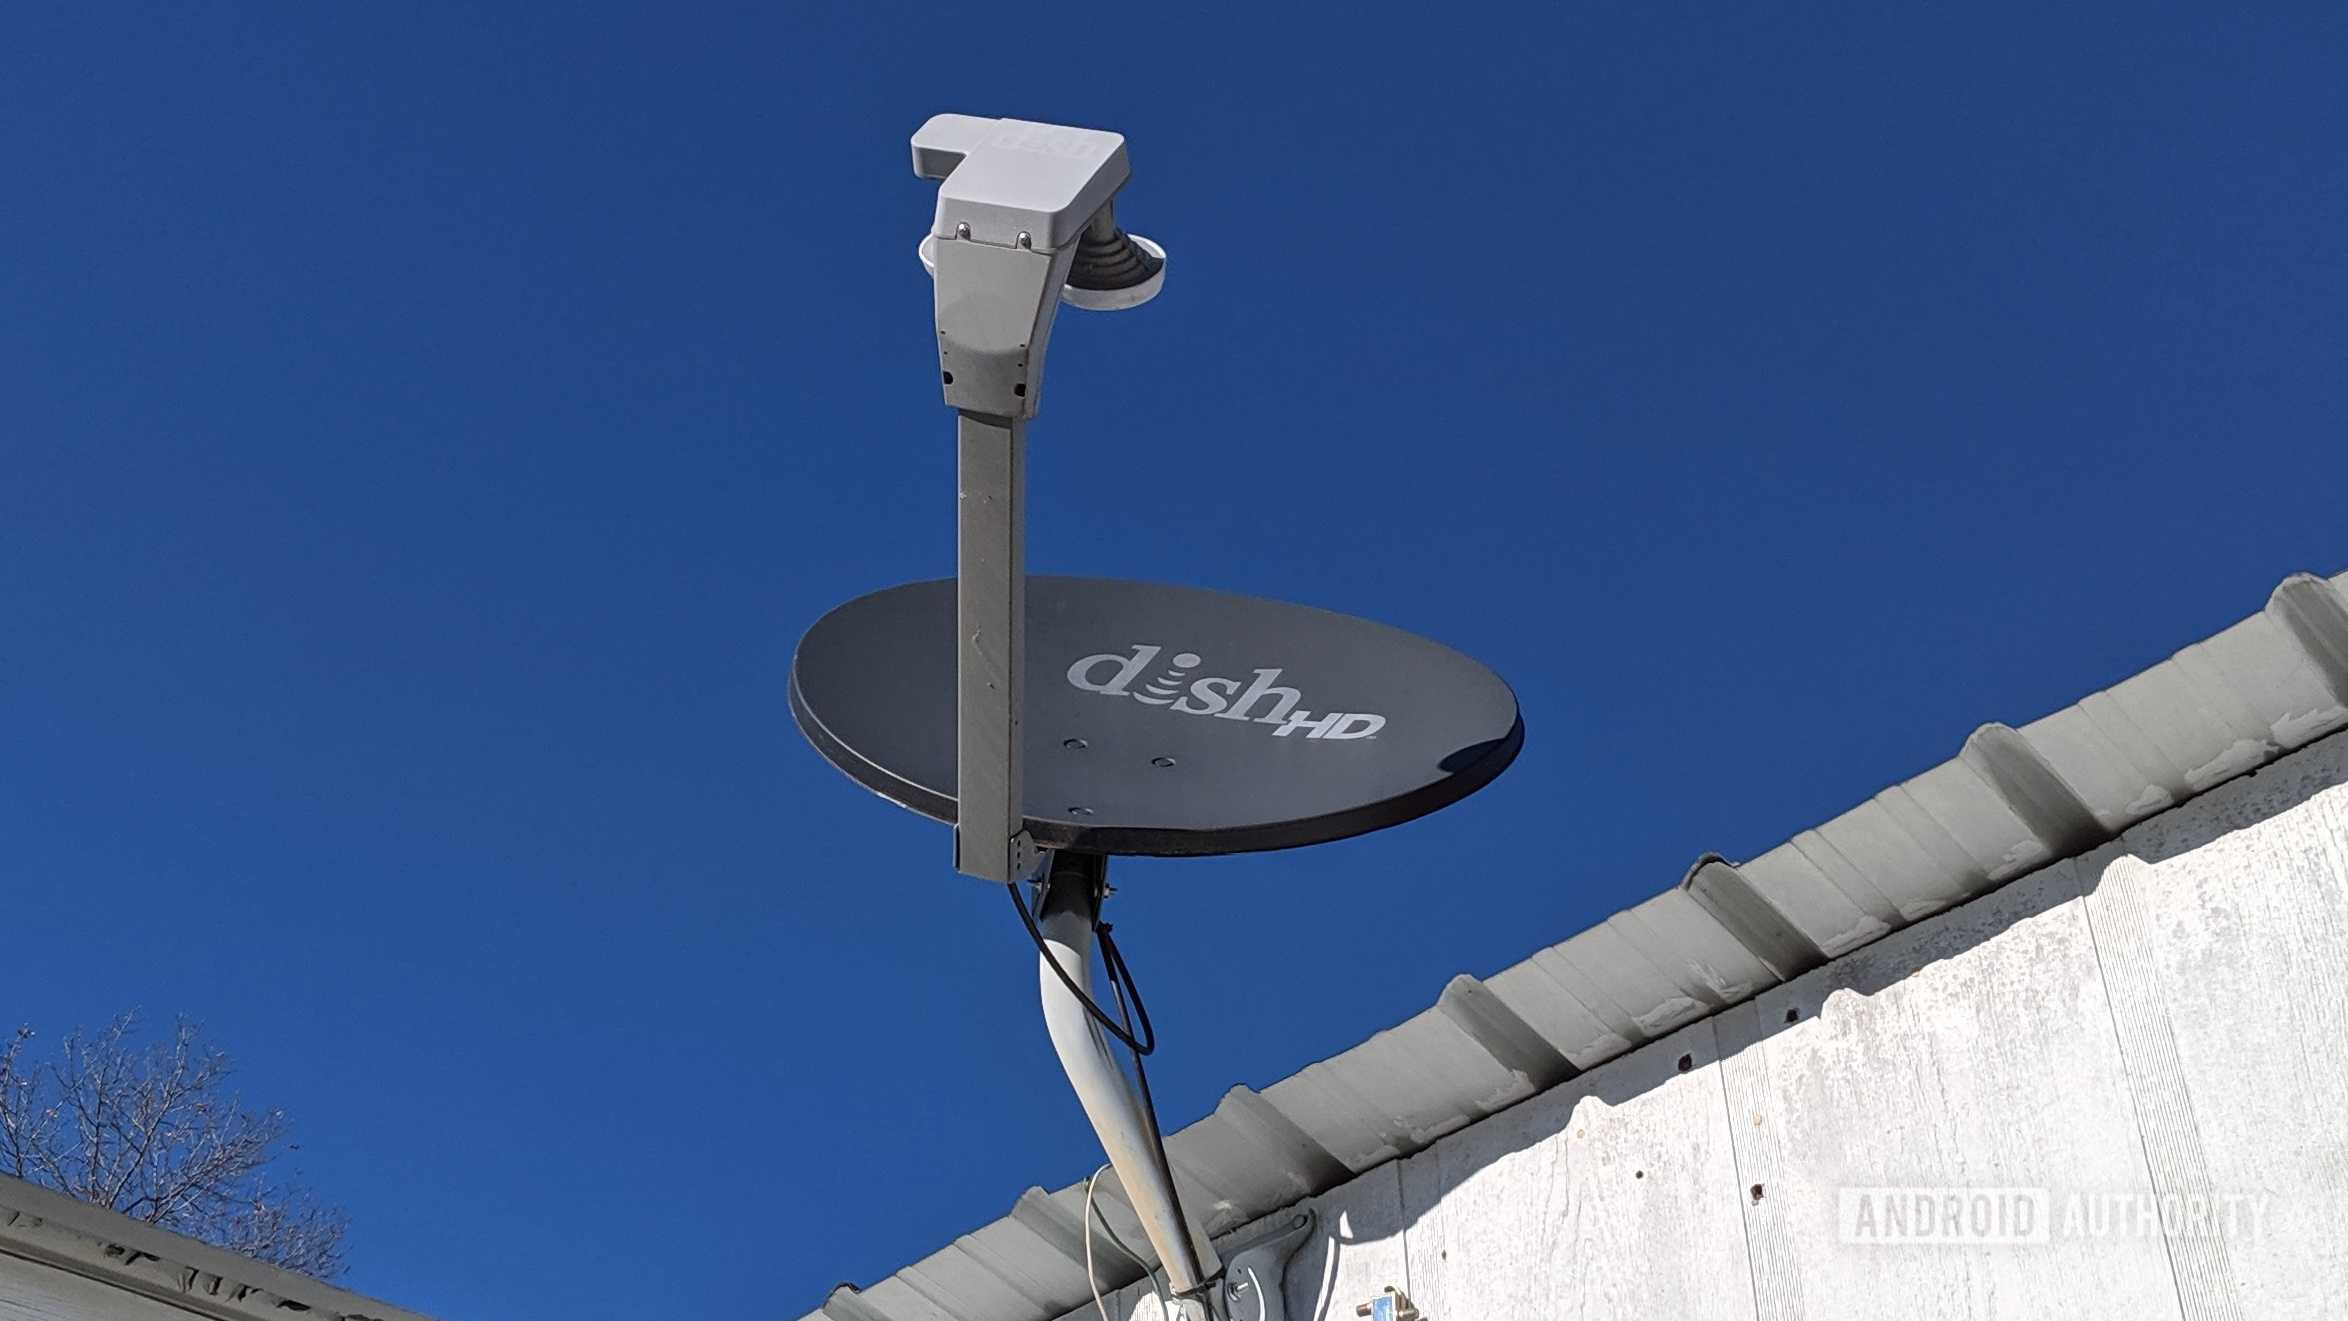 dish sat no longer used because of video streaming services